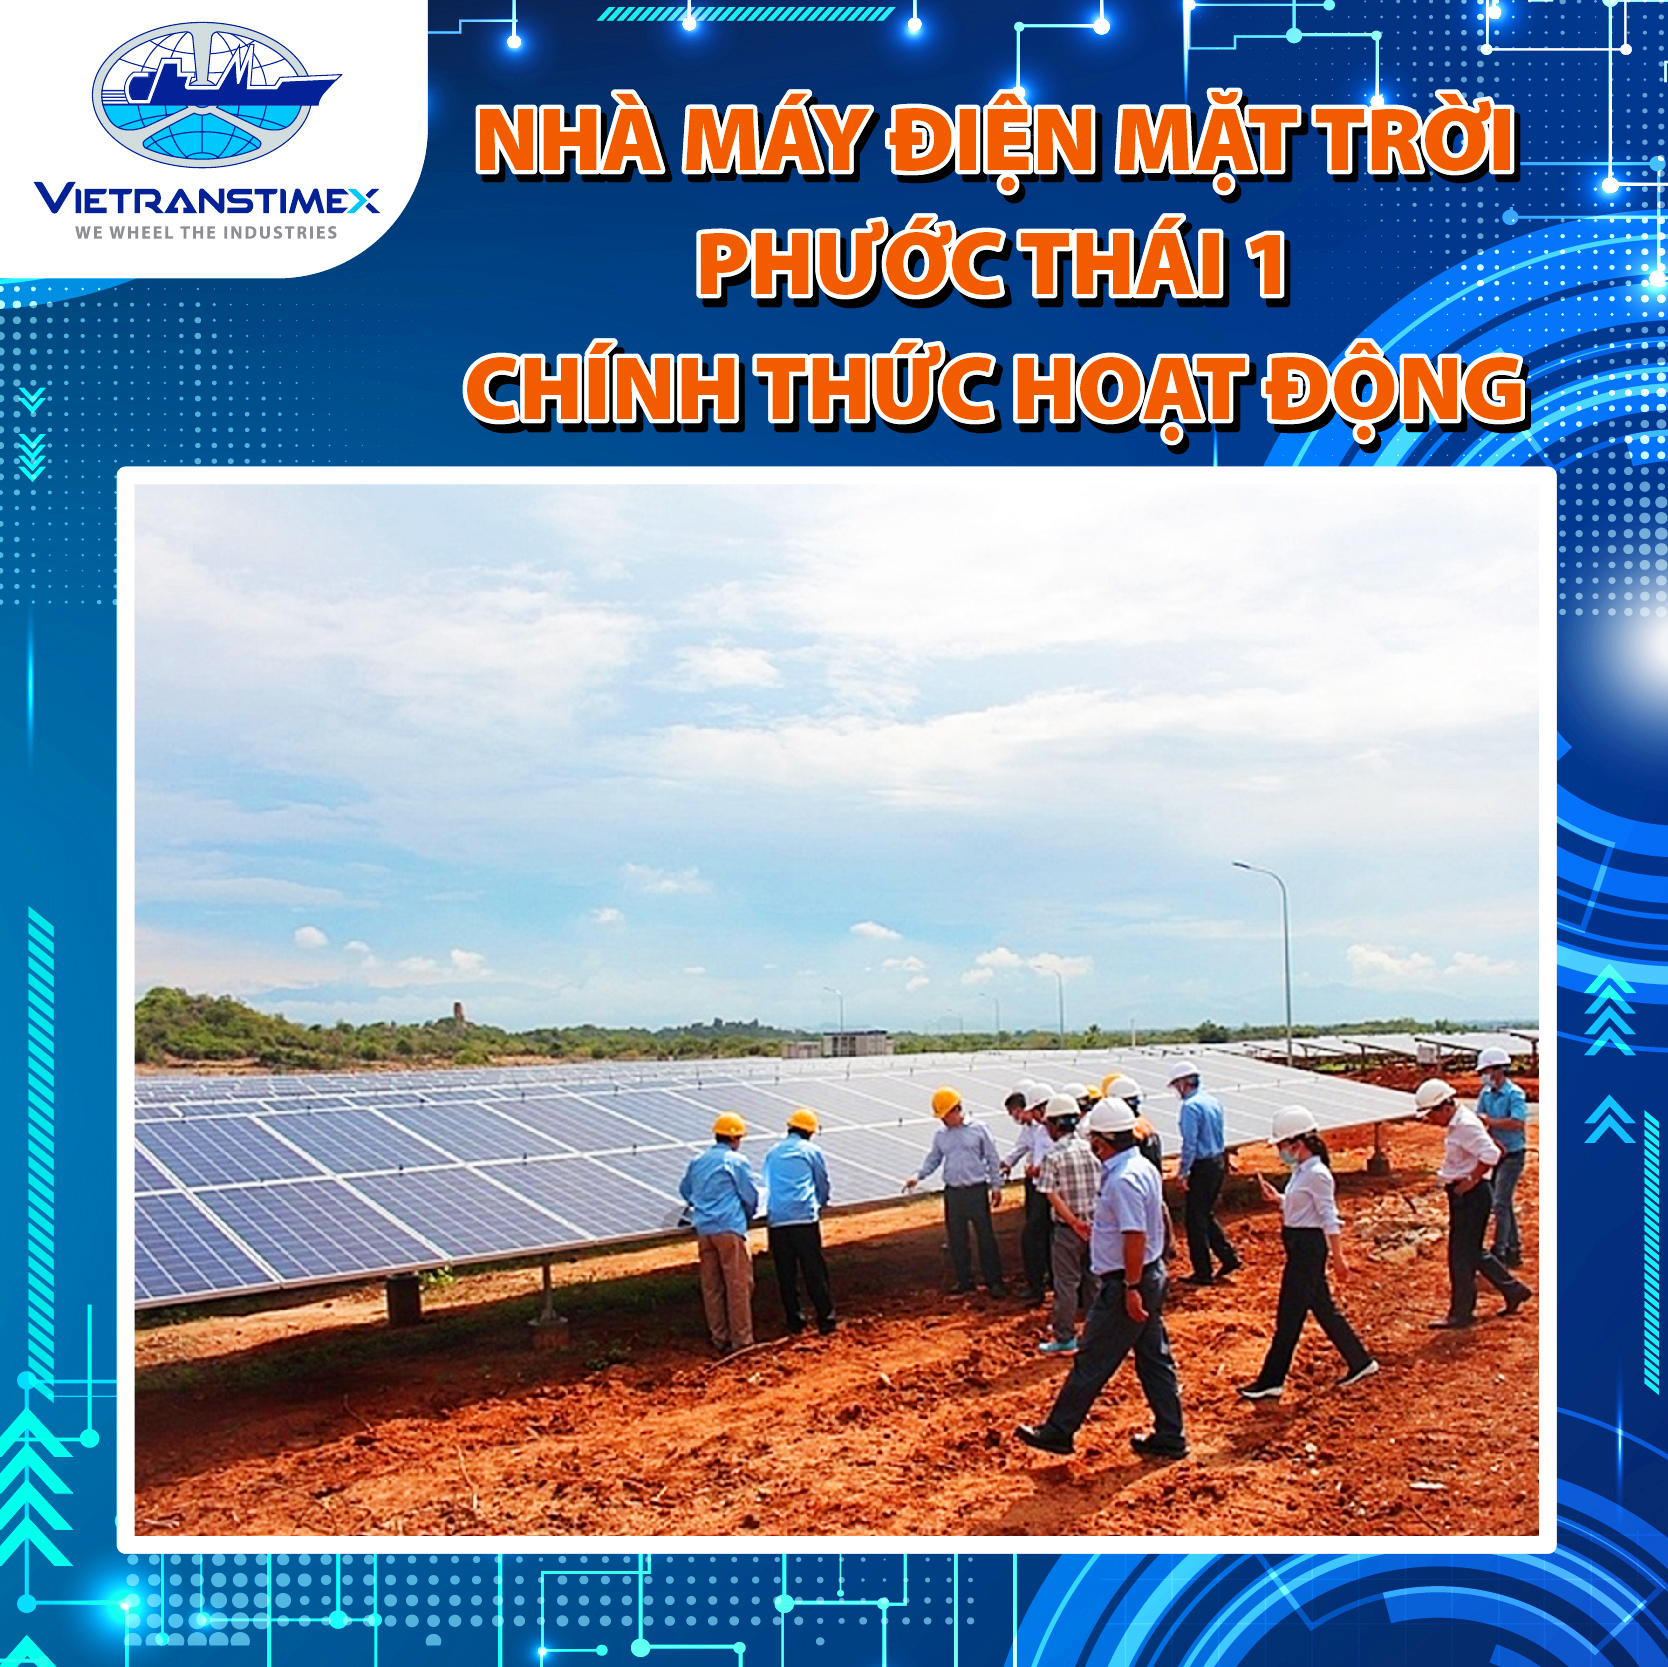 Phuoc Thai 1 Solar Power Plant (SPP) Has Been Put Into Operation